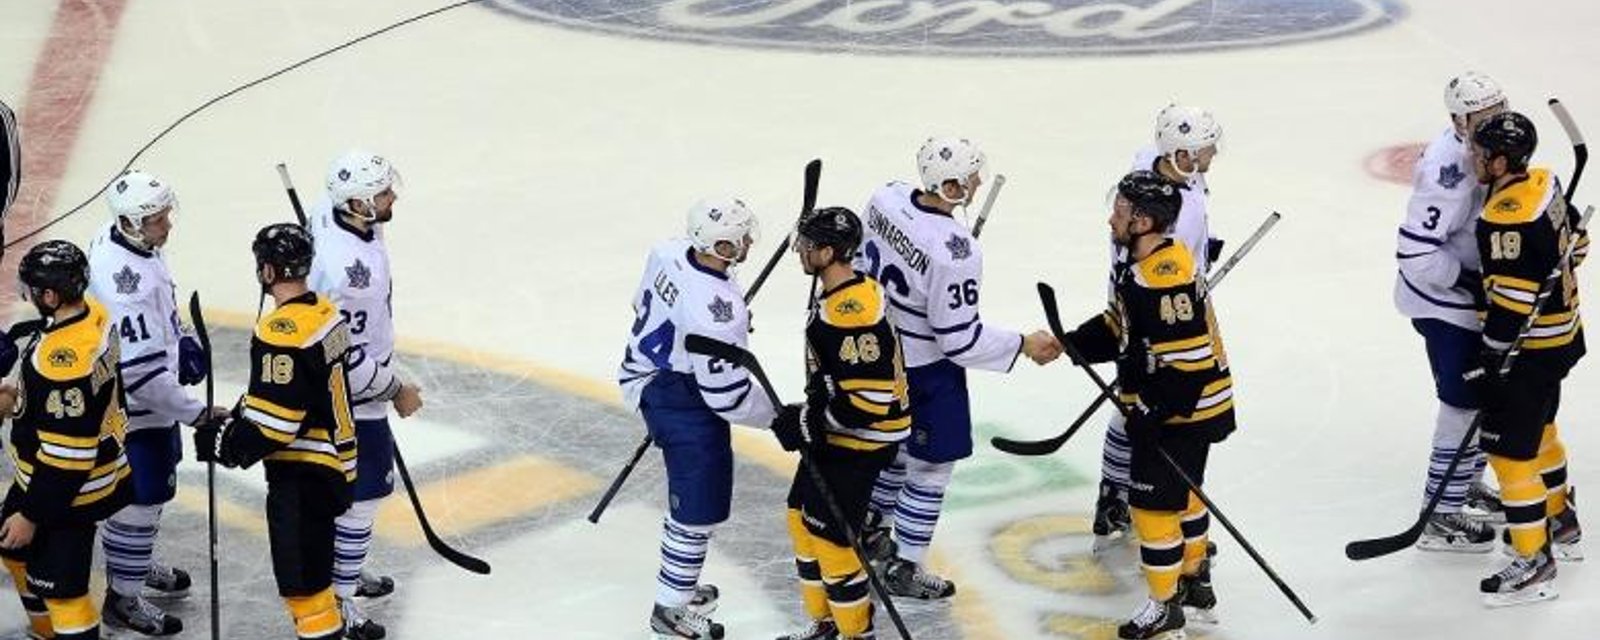 Maple Leafs exercise some of their Bruins demons on Tuesday night.